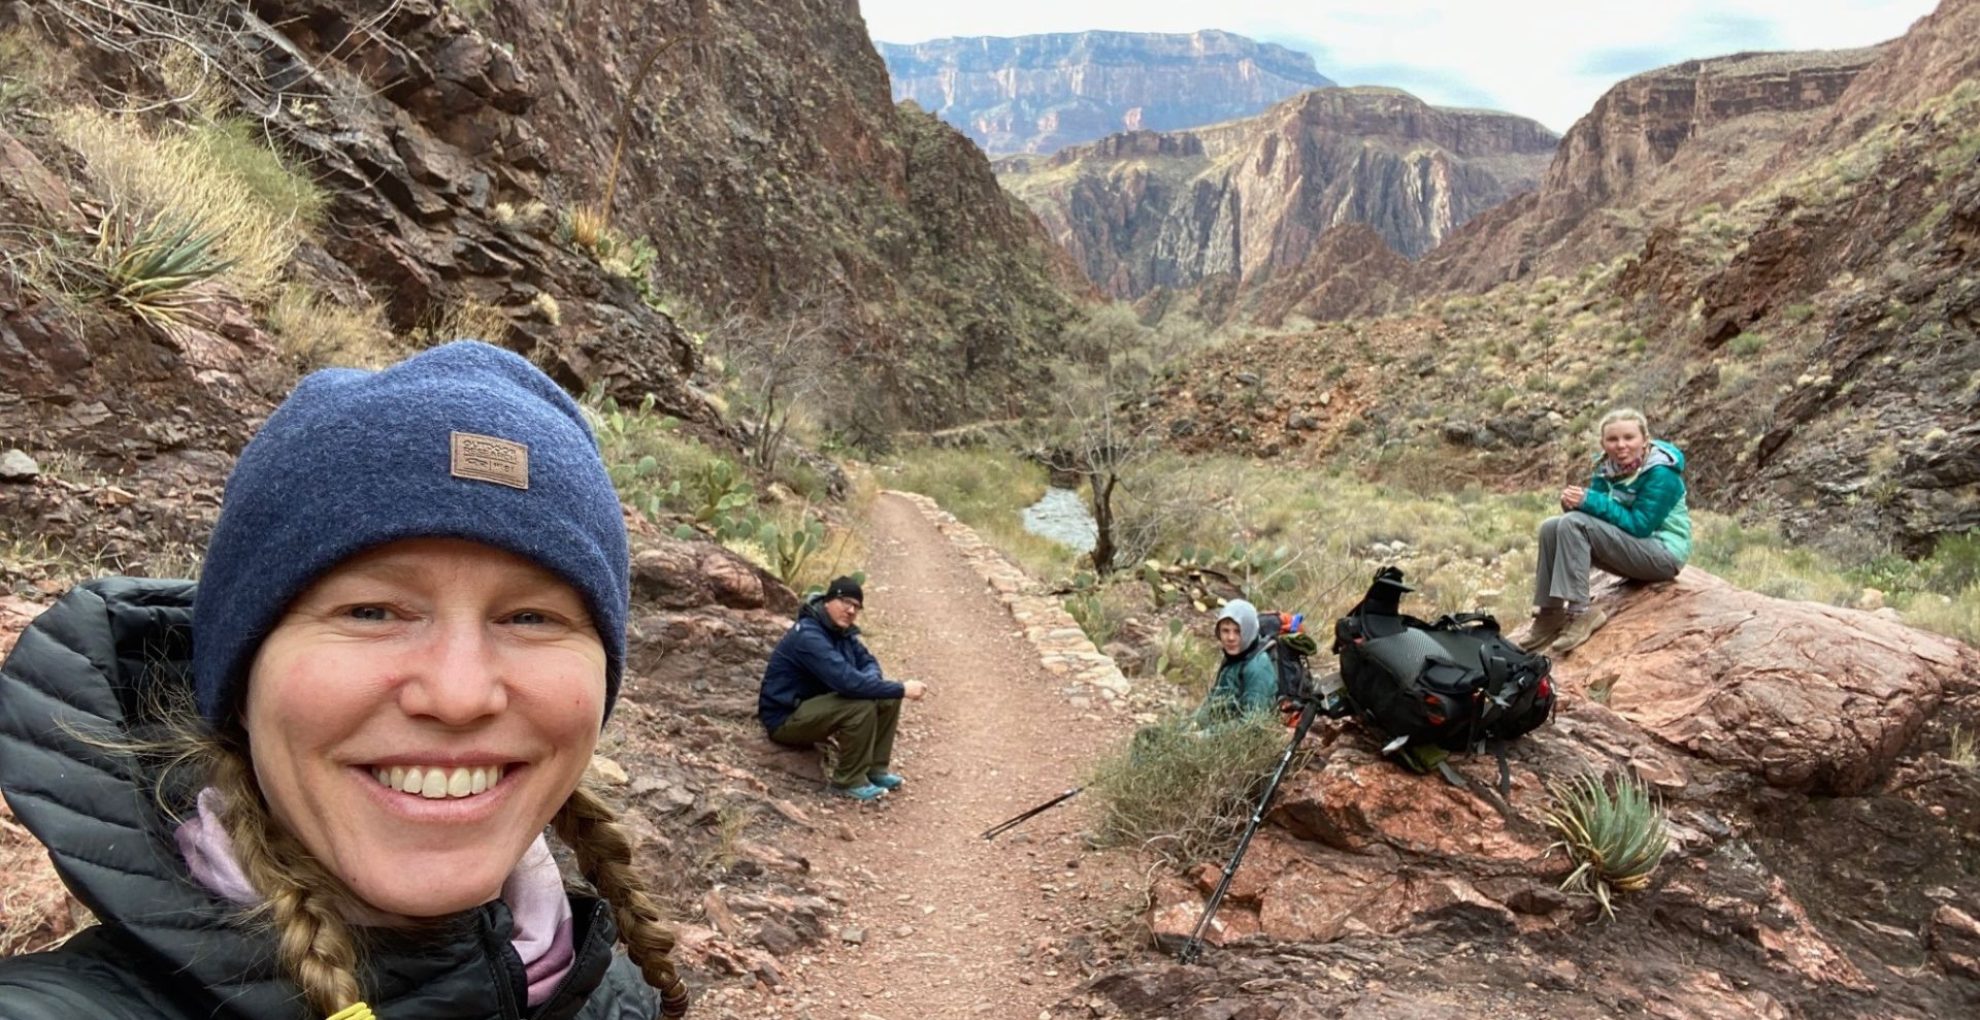 Robyn Wing and her family taking a break on a backpacking trip in the Grand Canyon. Credit: Robyn Wing